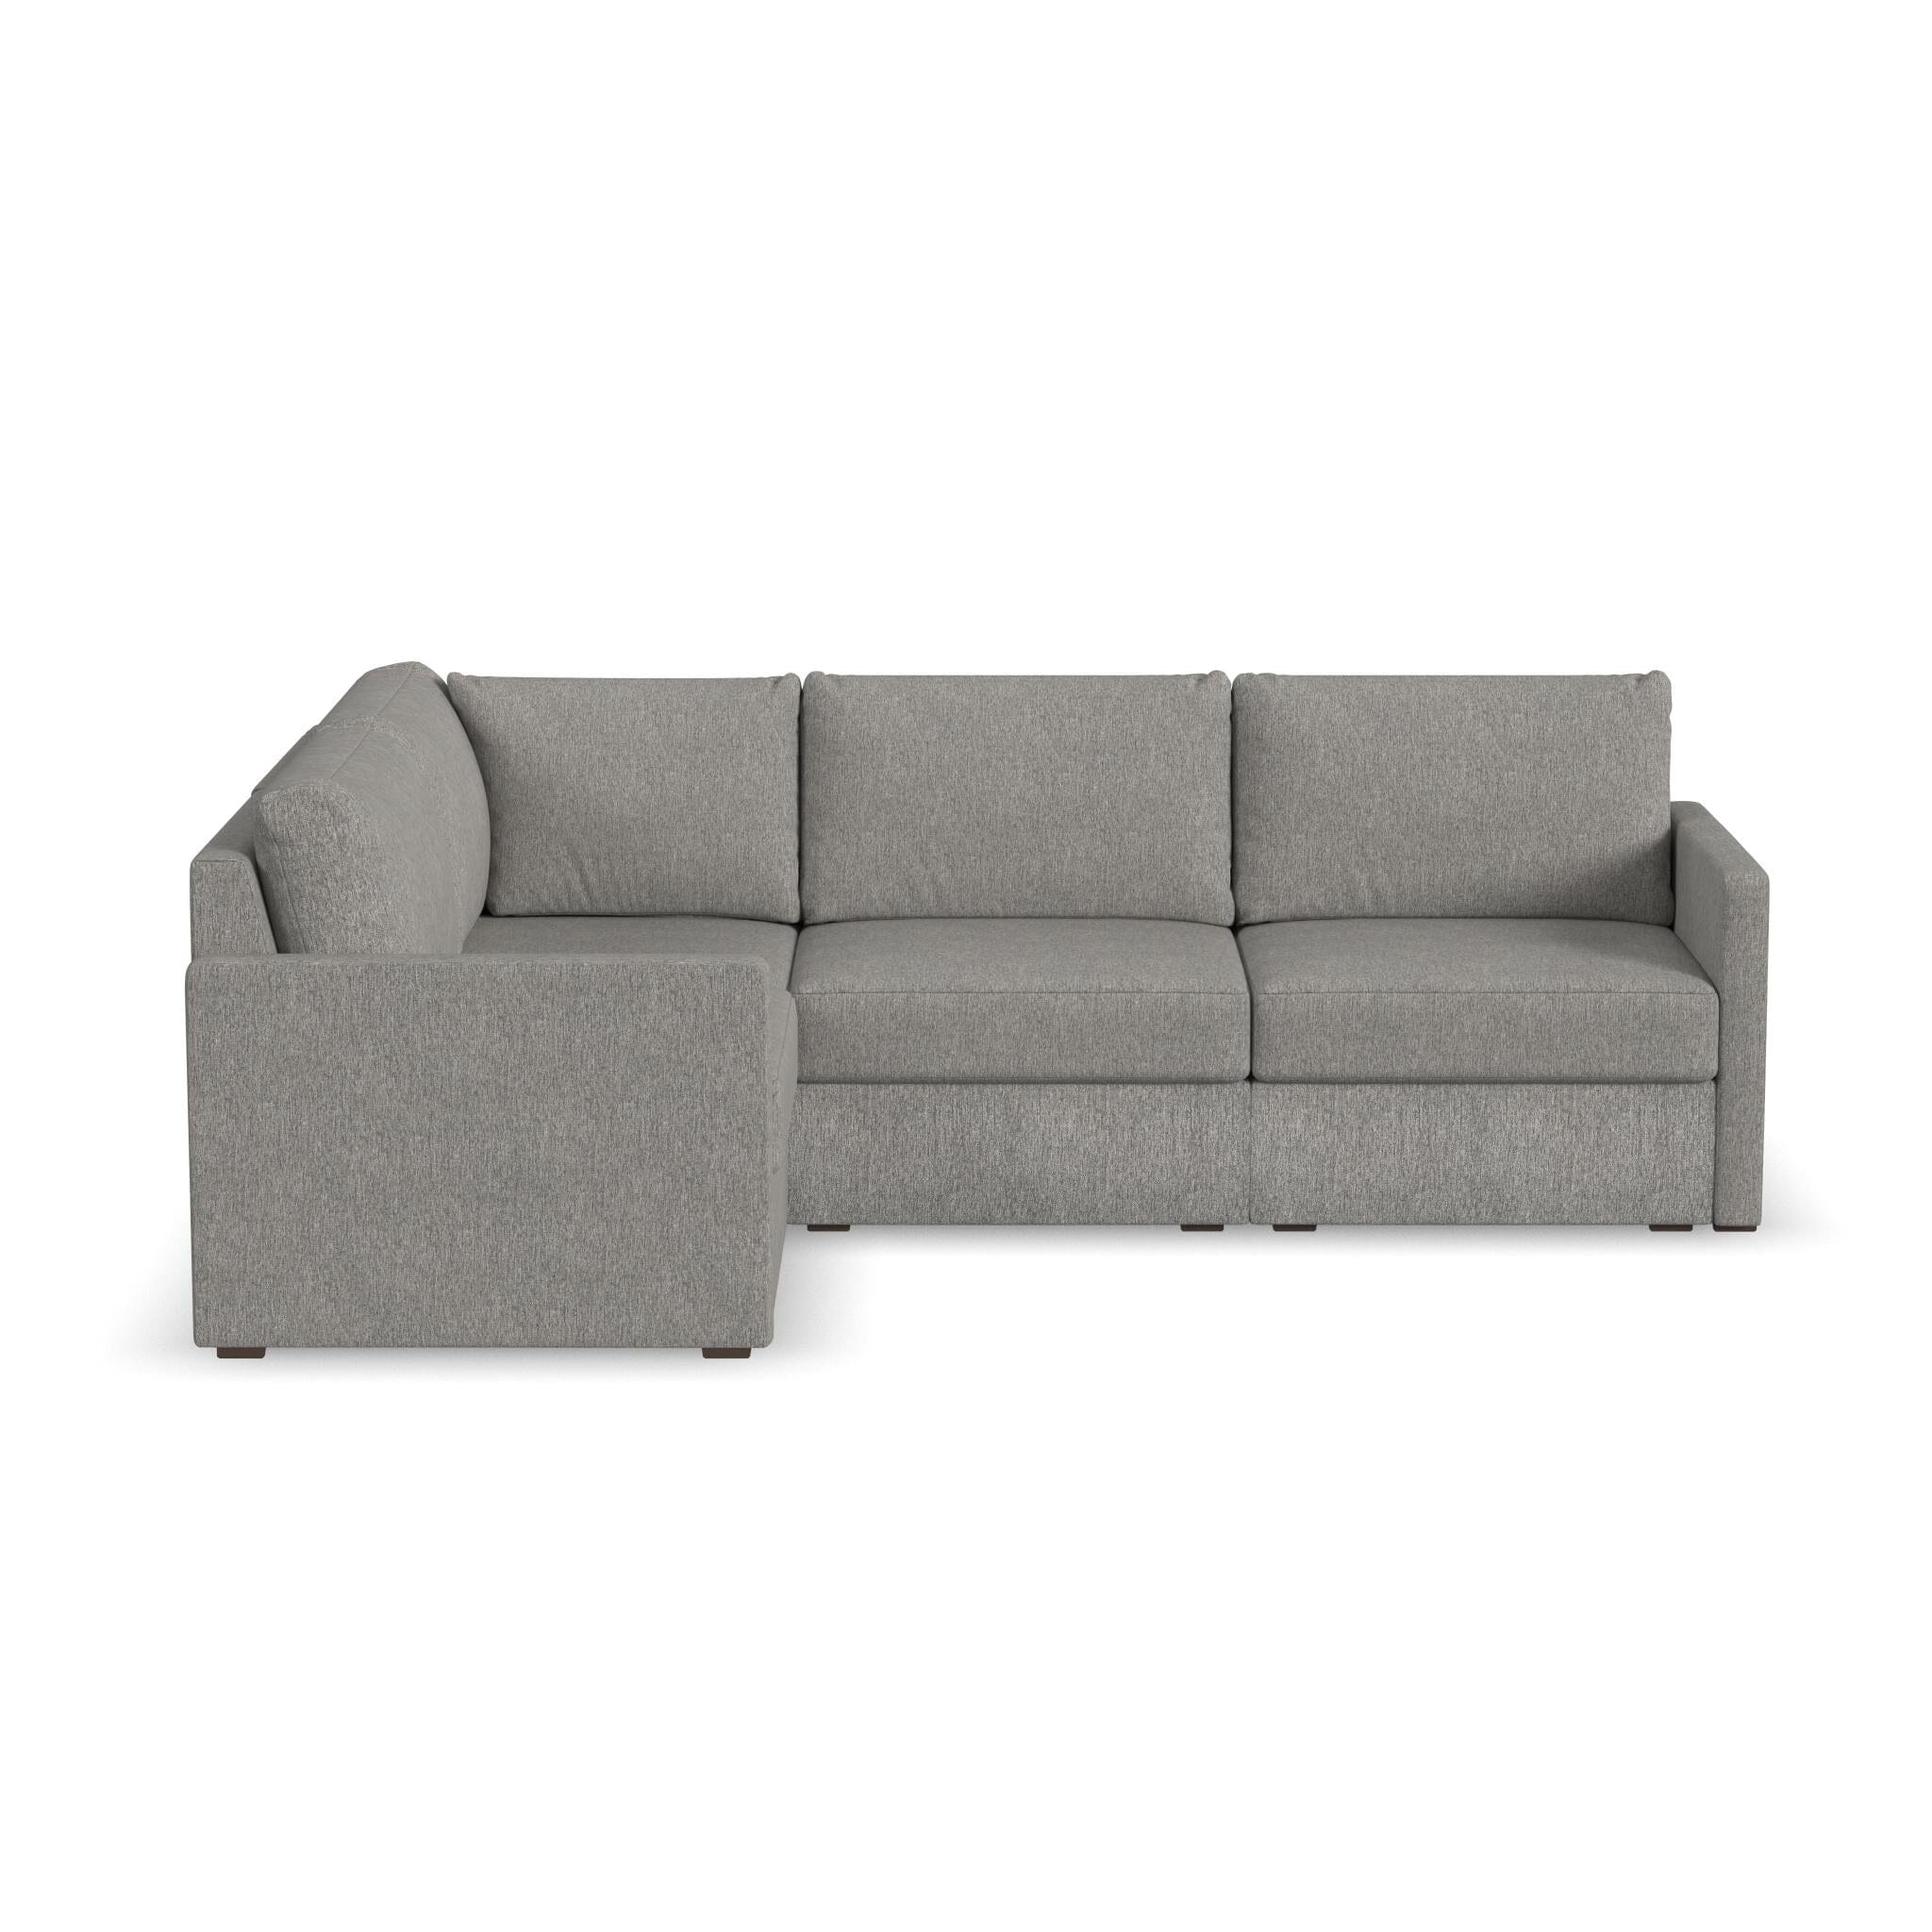 Traditional 4-Seat Sectional with Narrow Arm By Flex Sectional Flex